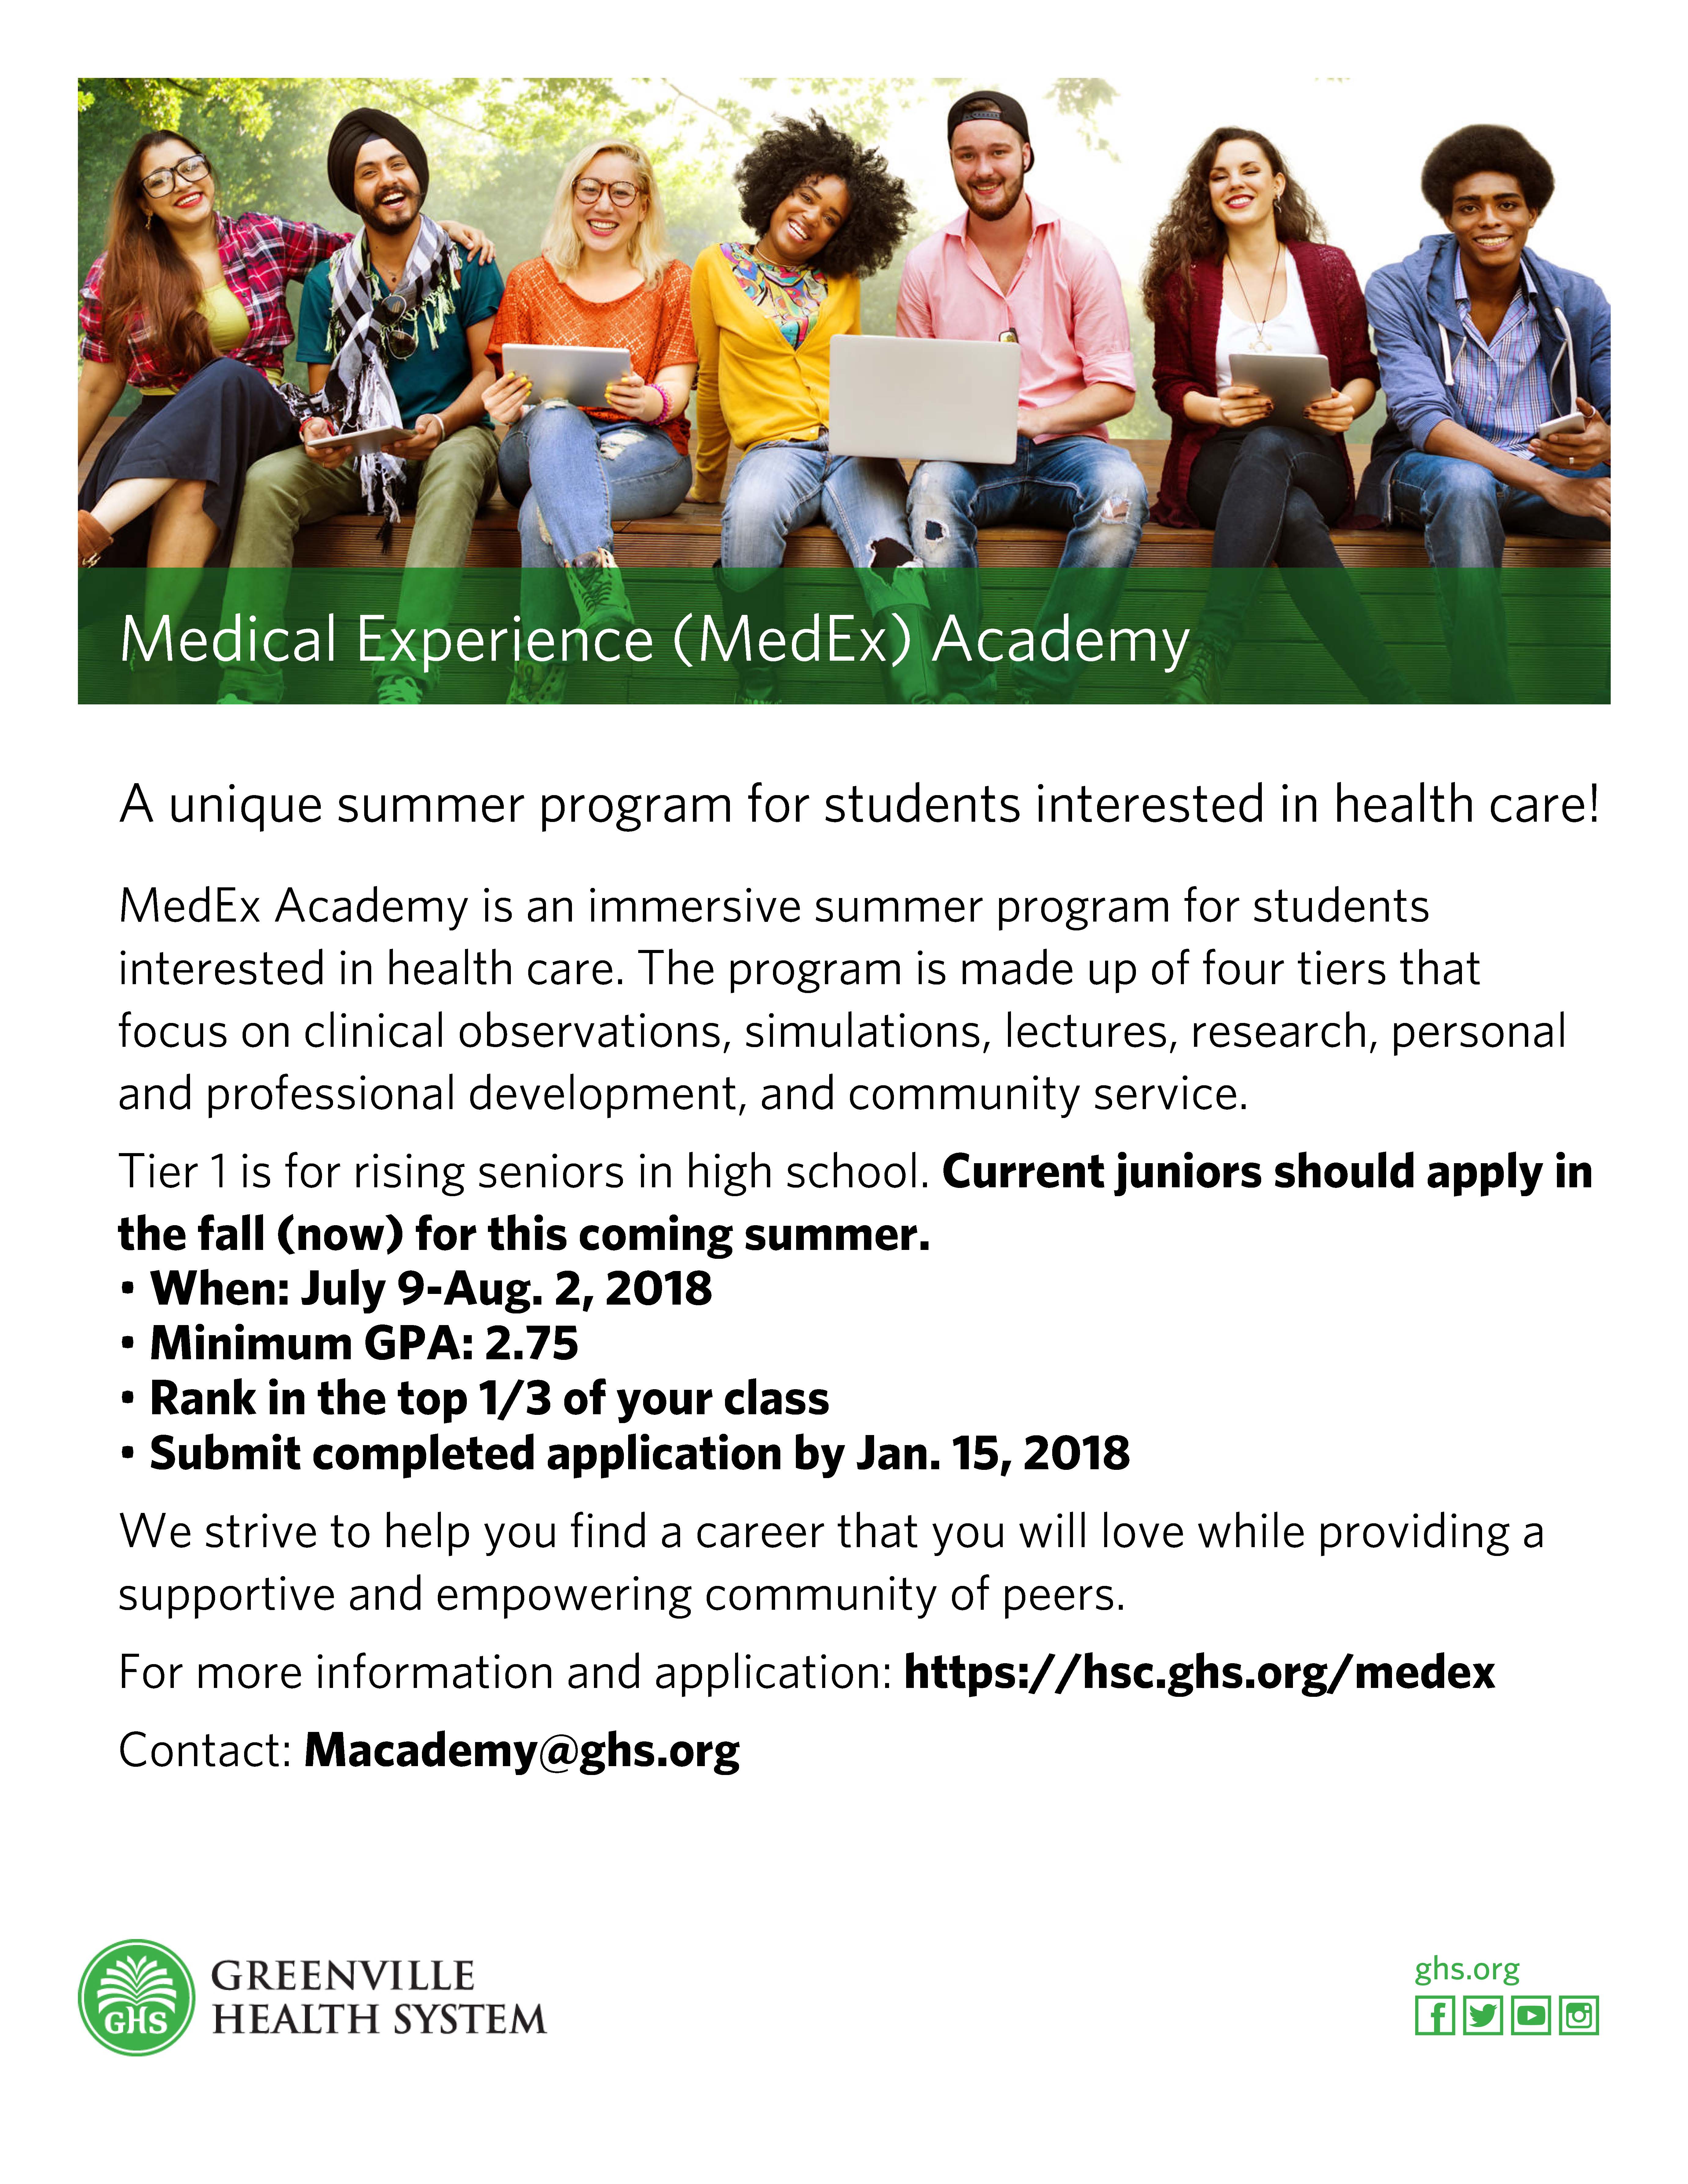 Medical Experience (MedEx) Academy - Upstate AHEC